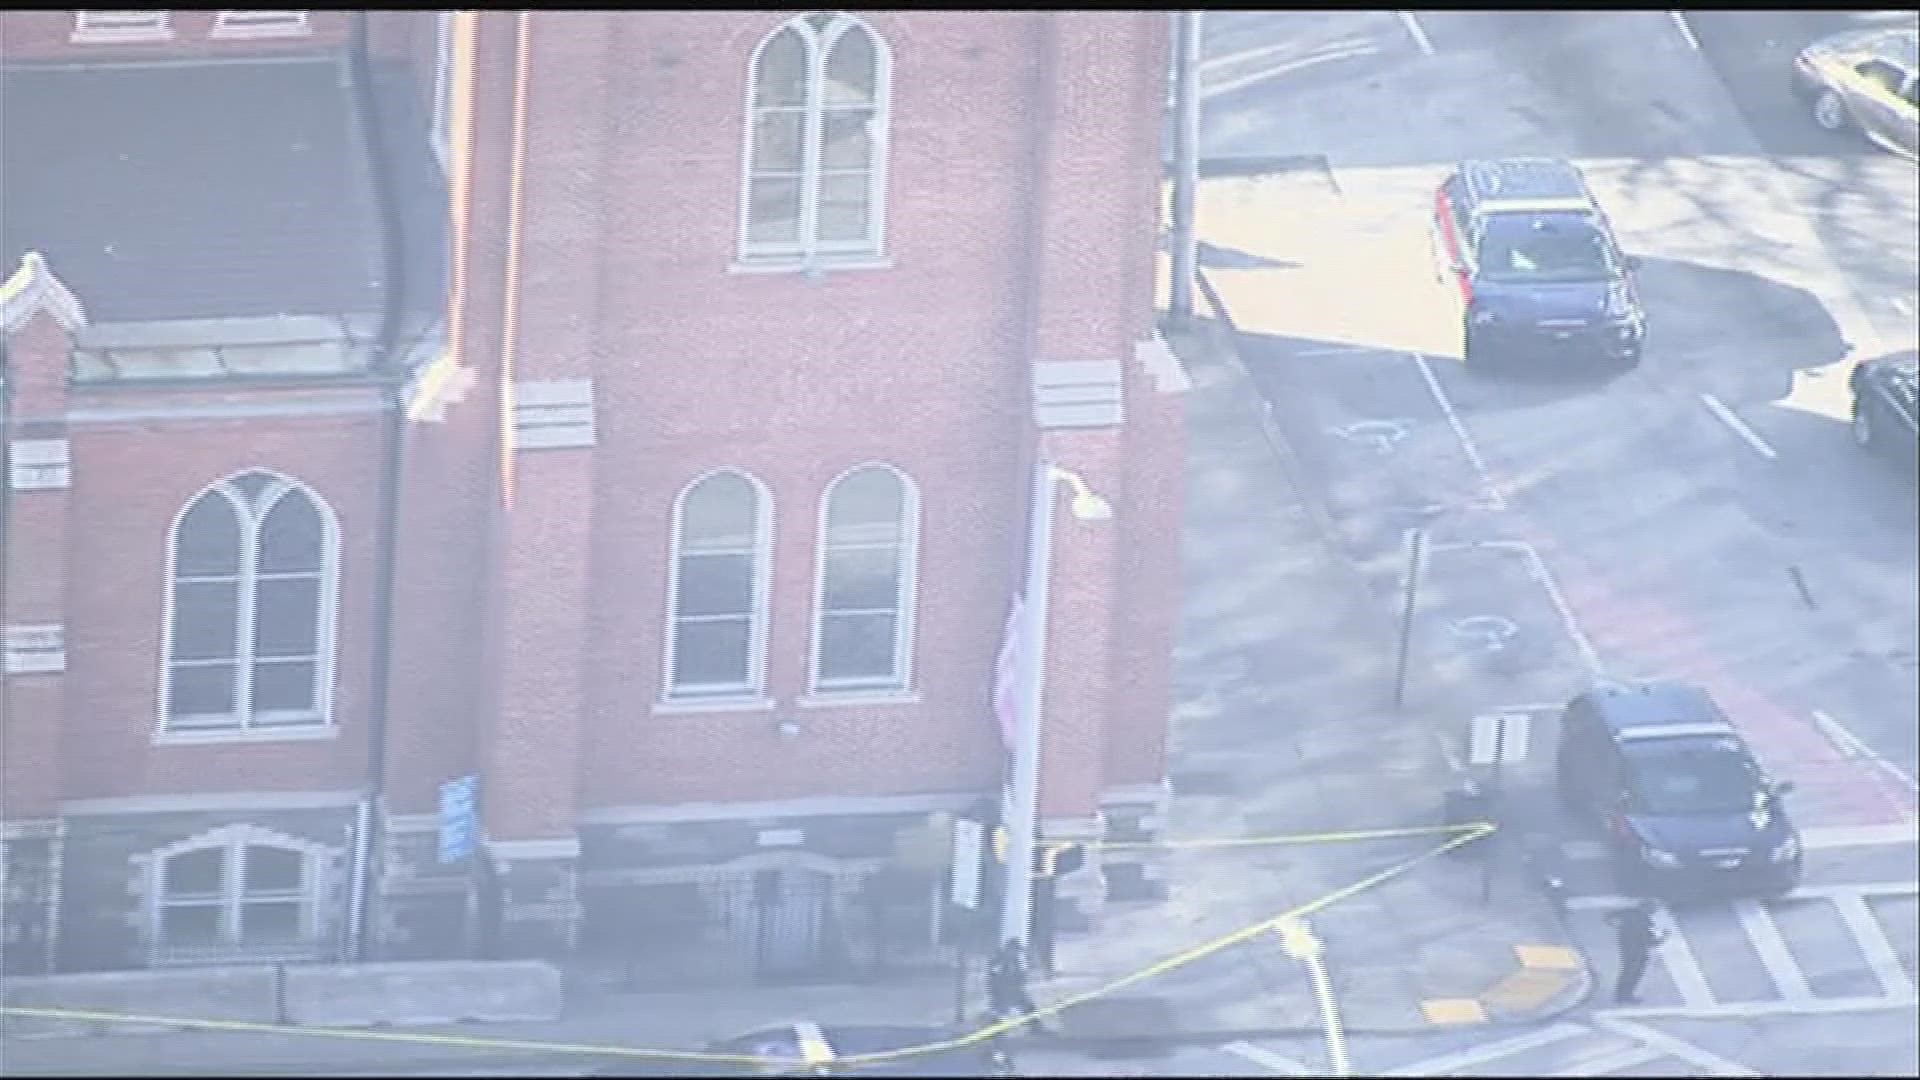 Police were seen blocking a street while roping off a building with crime scene tape.